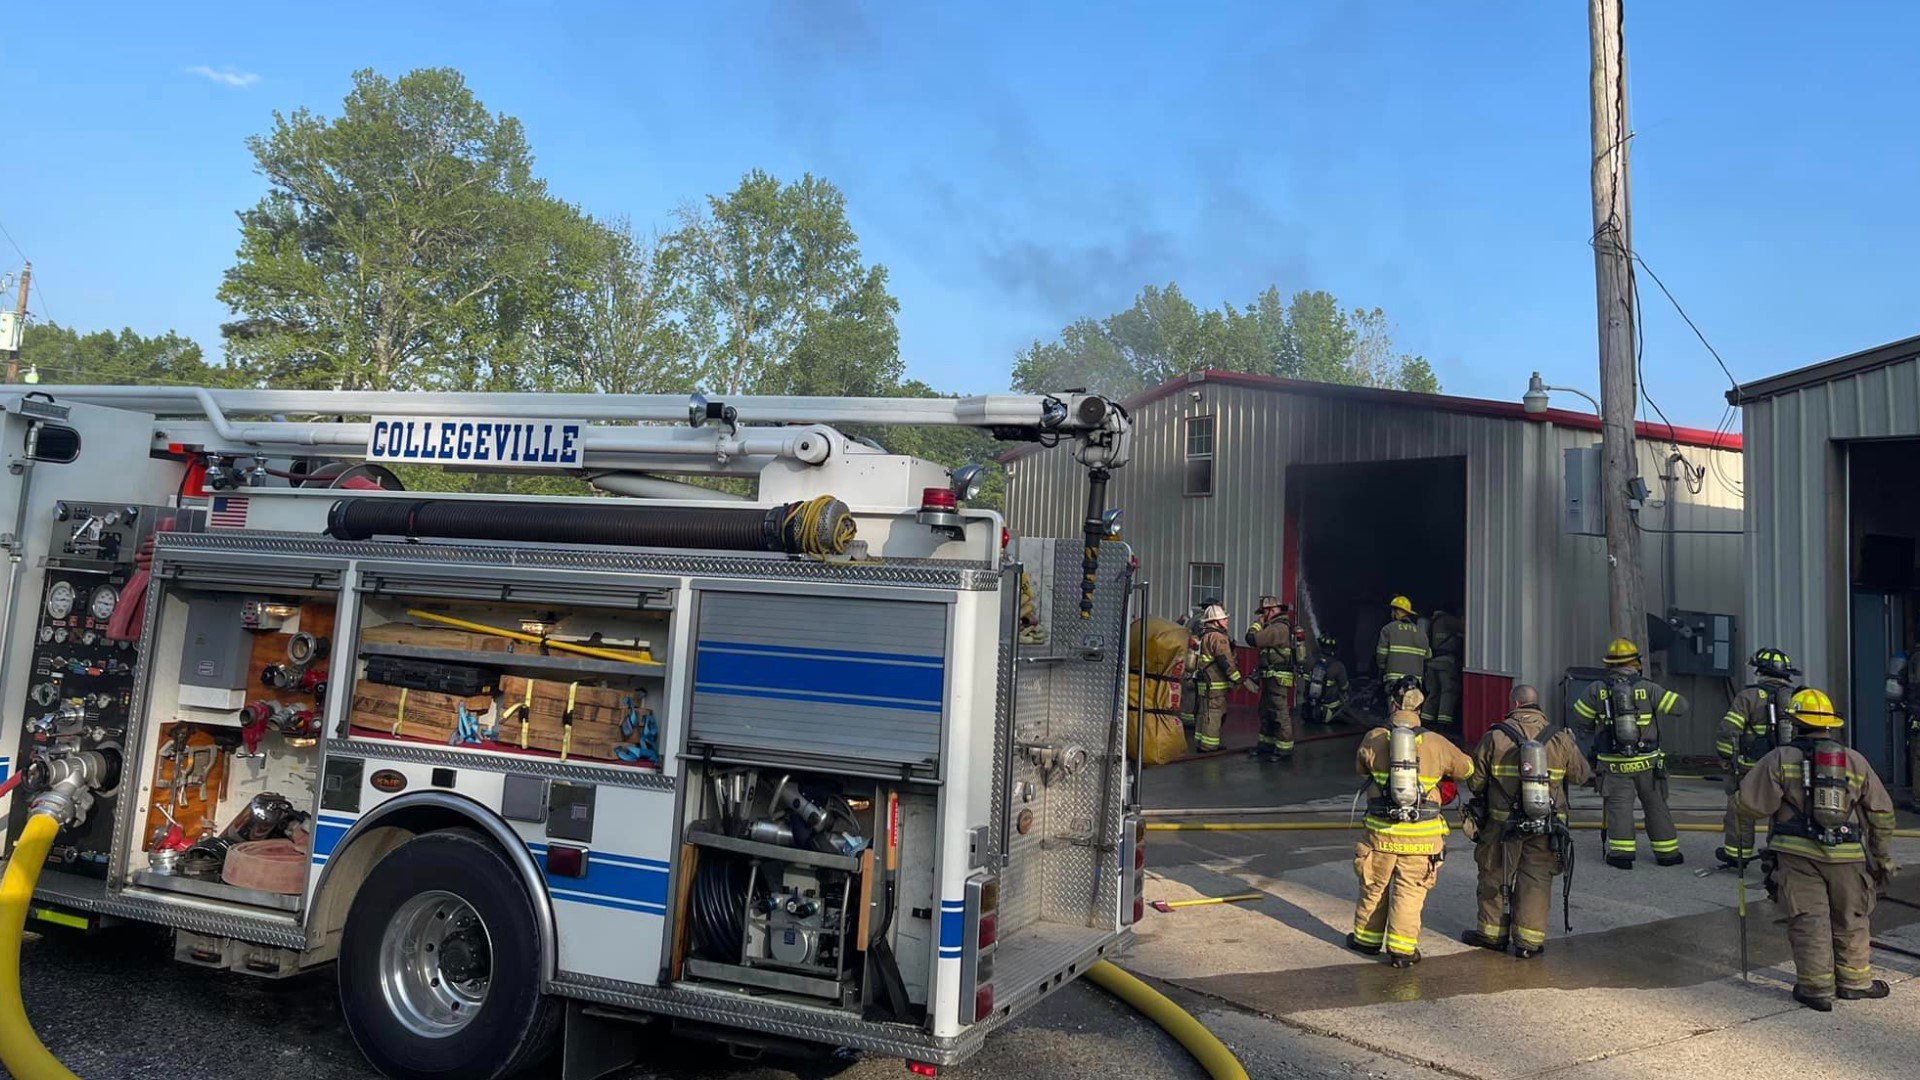 The Saline County Dispatch received multiple calls over the weekend alerting them that their main fire station was on fire, with local crews springing into action.